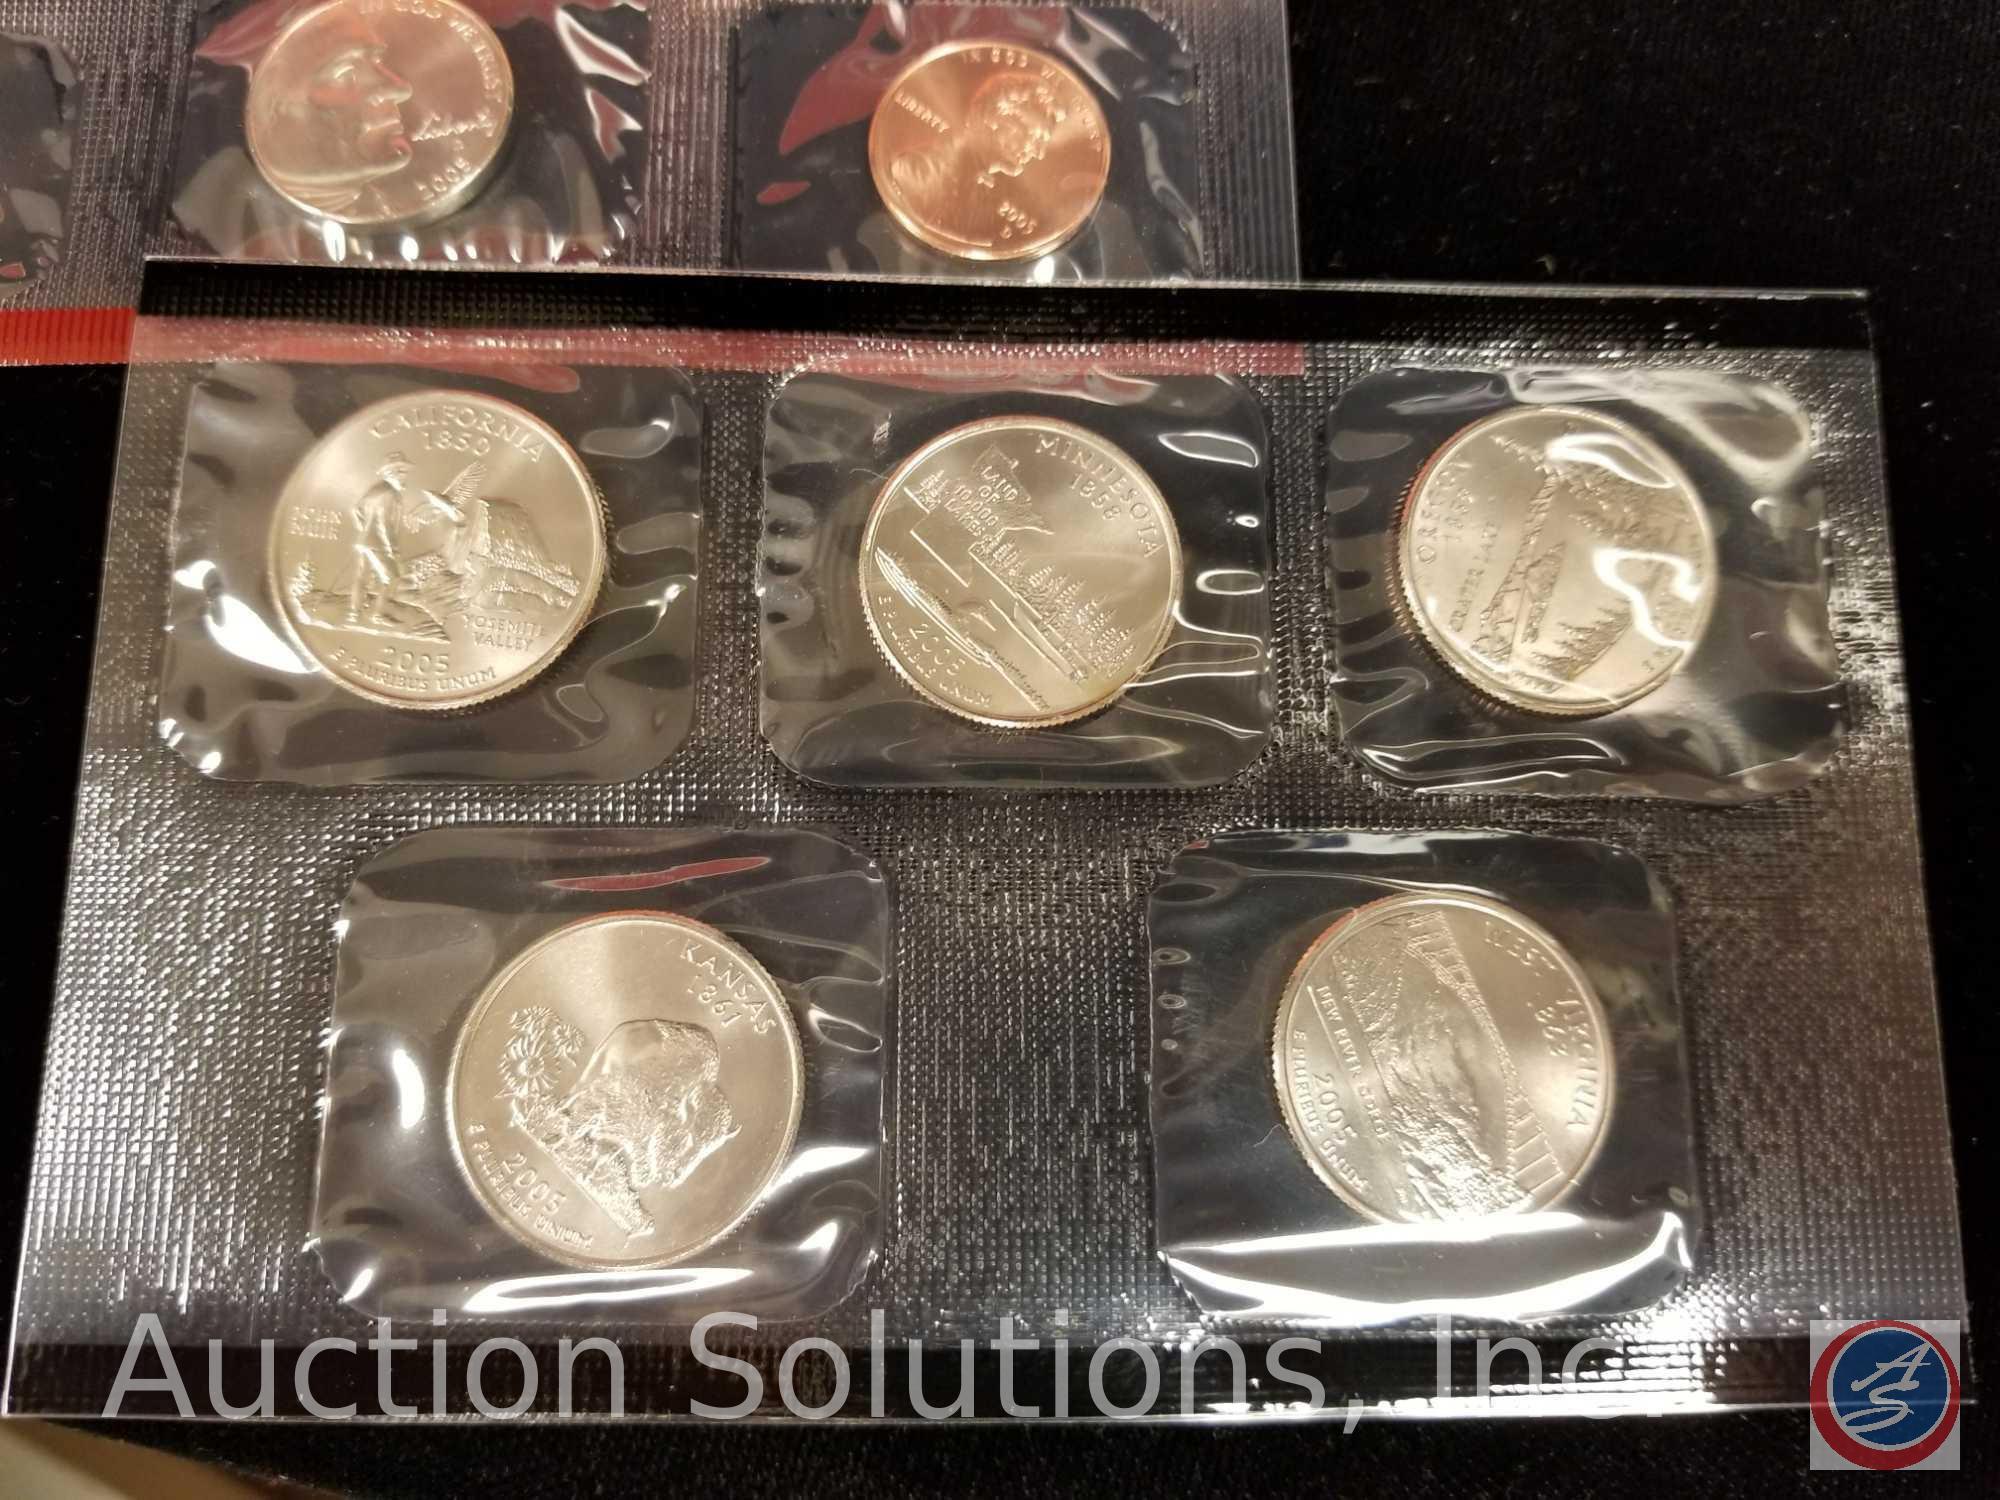 United States Mint Uncirculated Coin Set 2005 Denver and Philadelphia Sacajawea Dollar, and